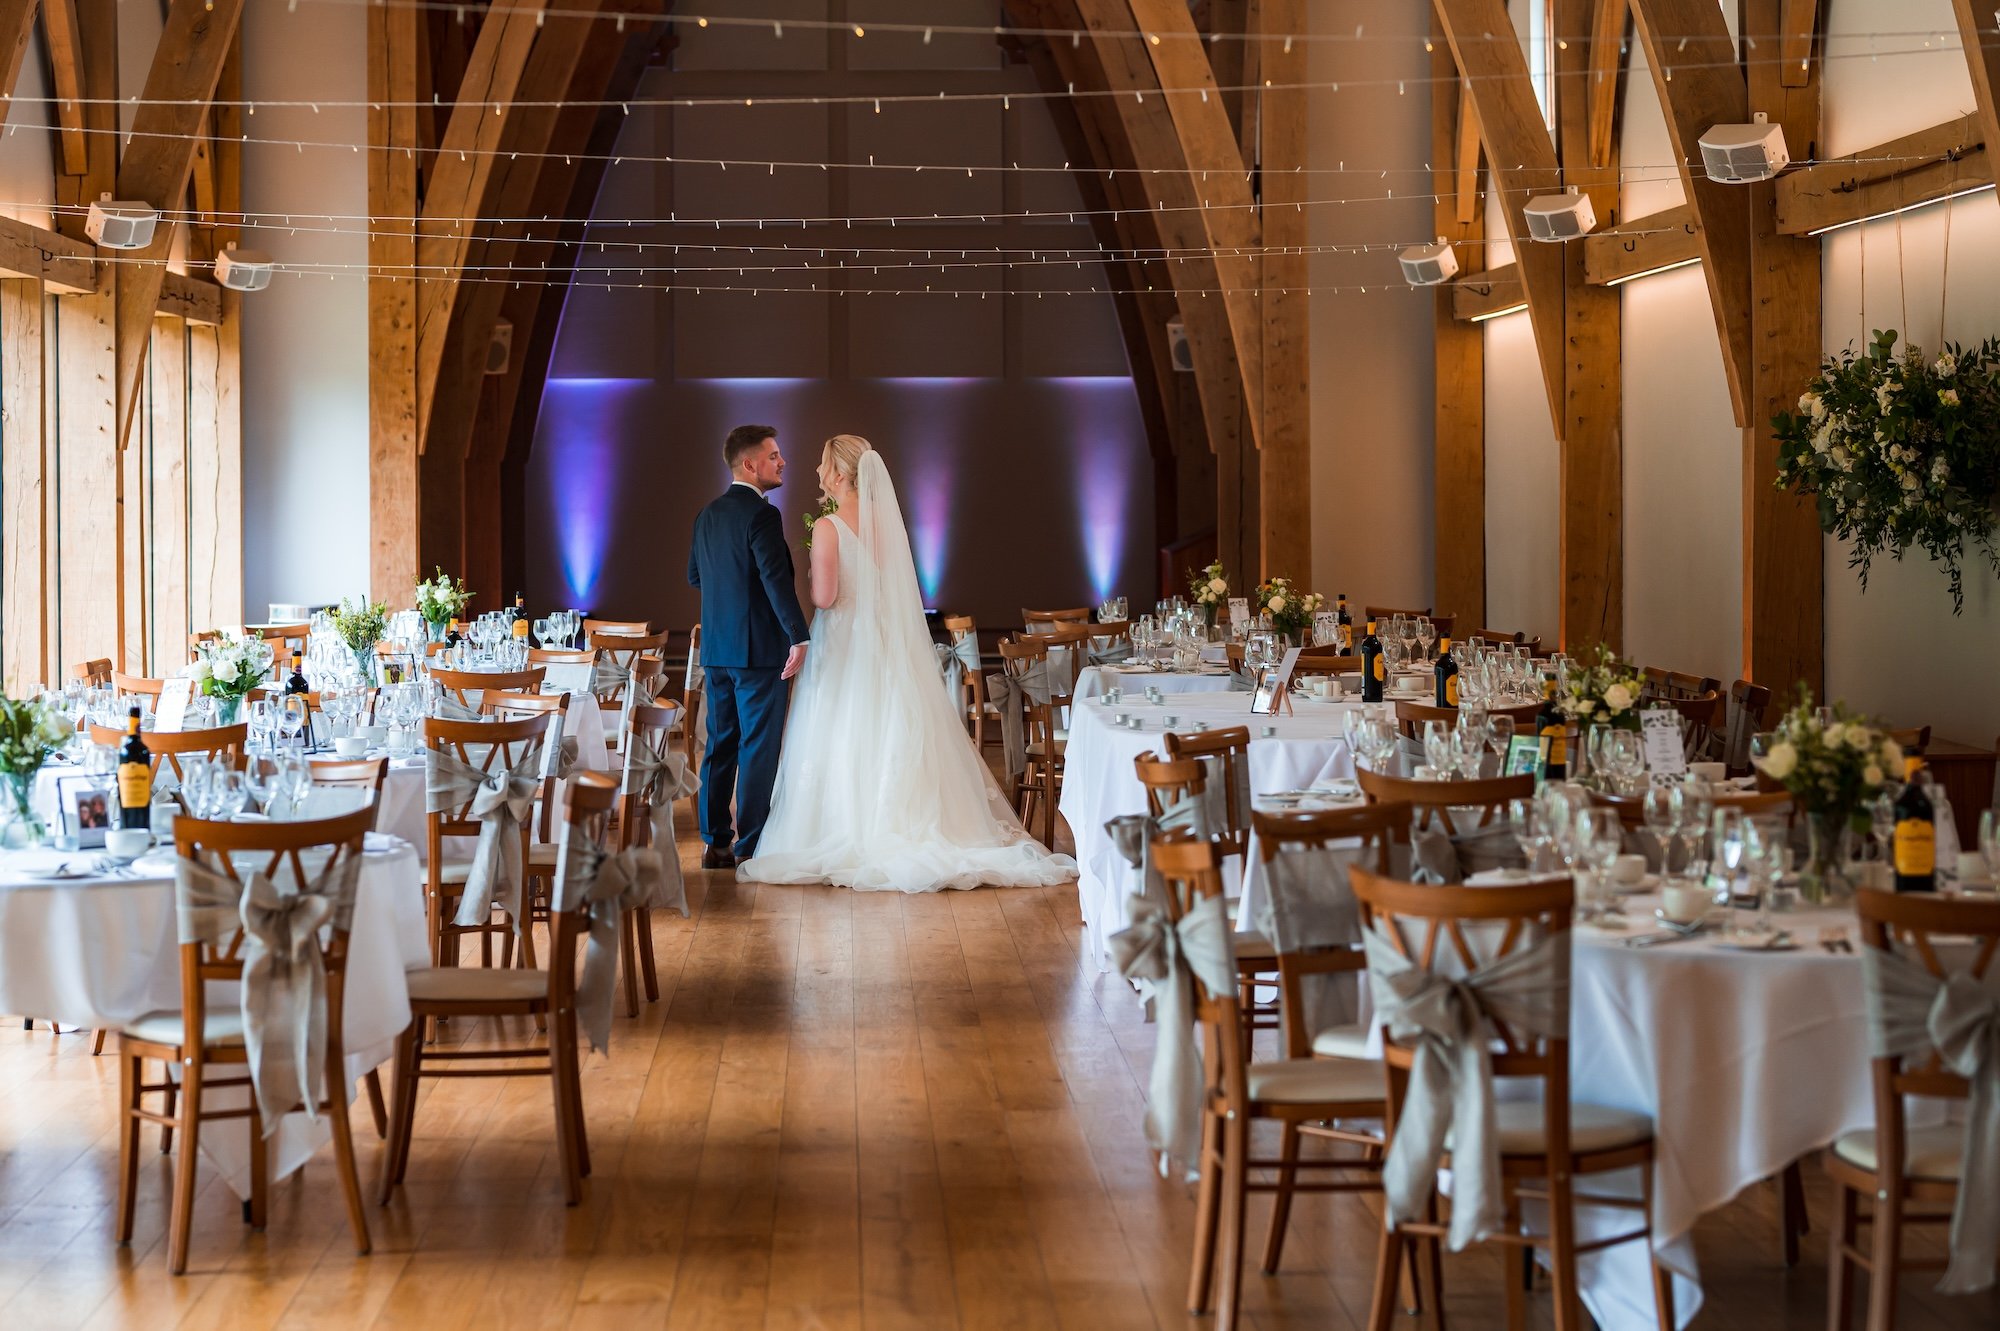 Sophie and Sam at a moment at The Mill Barns Wedding Venue